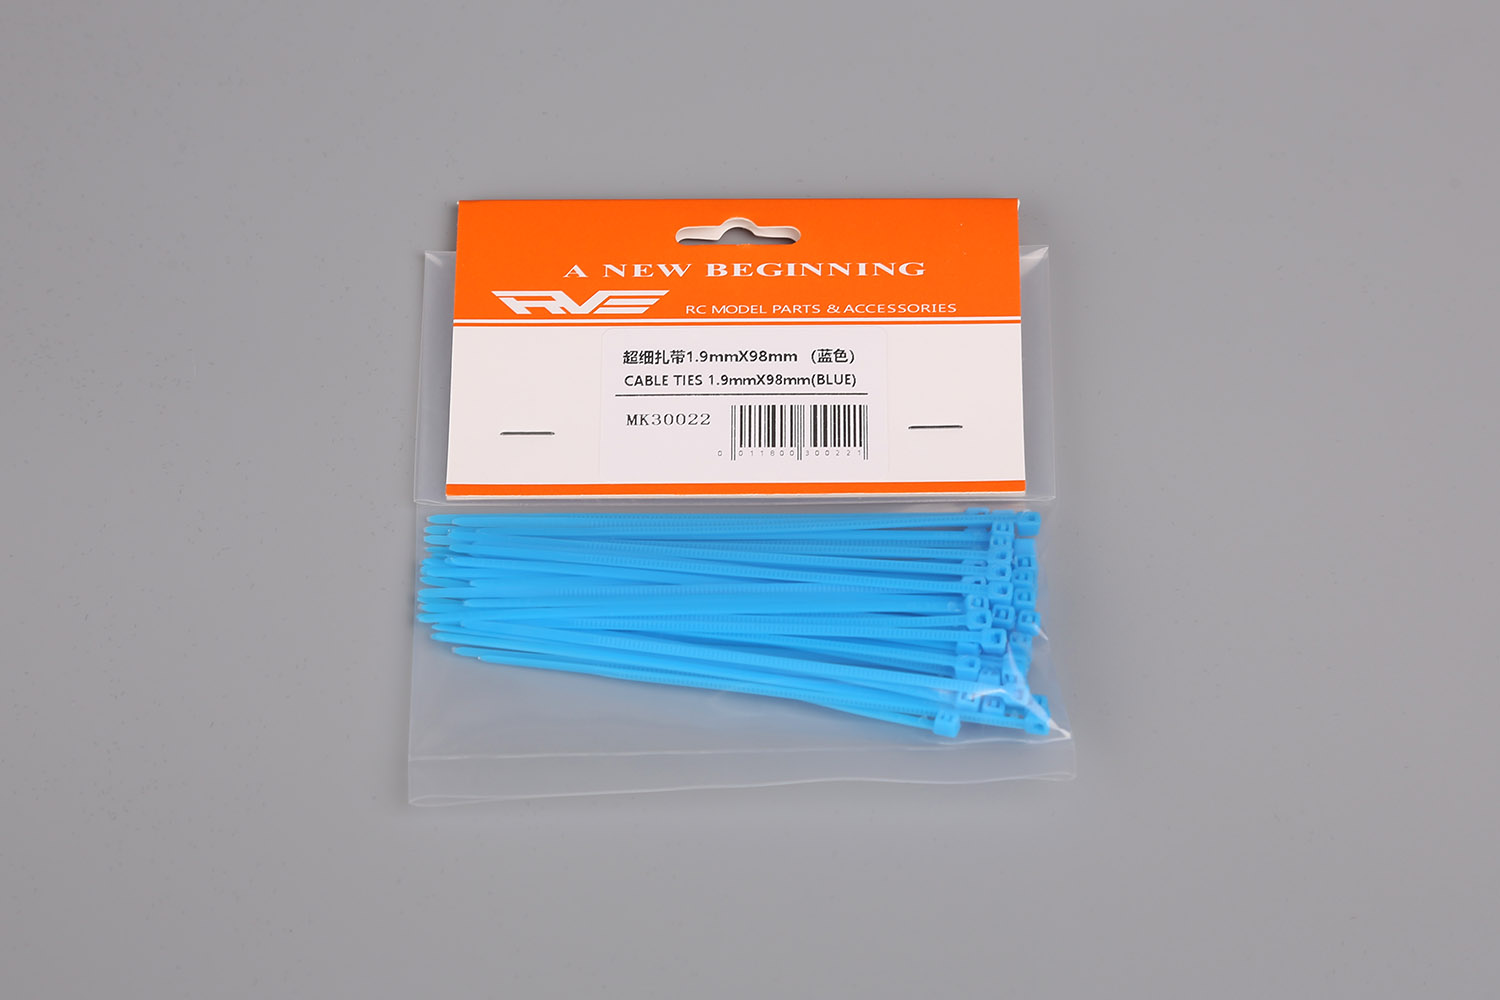 CABLE TIES 1.9mmX98mm (BLUE) MK30022(图1)